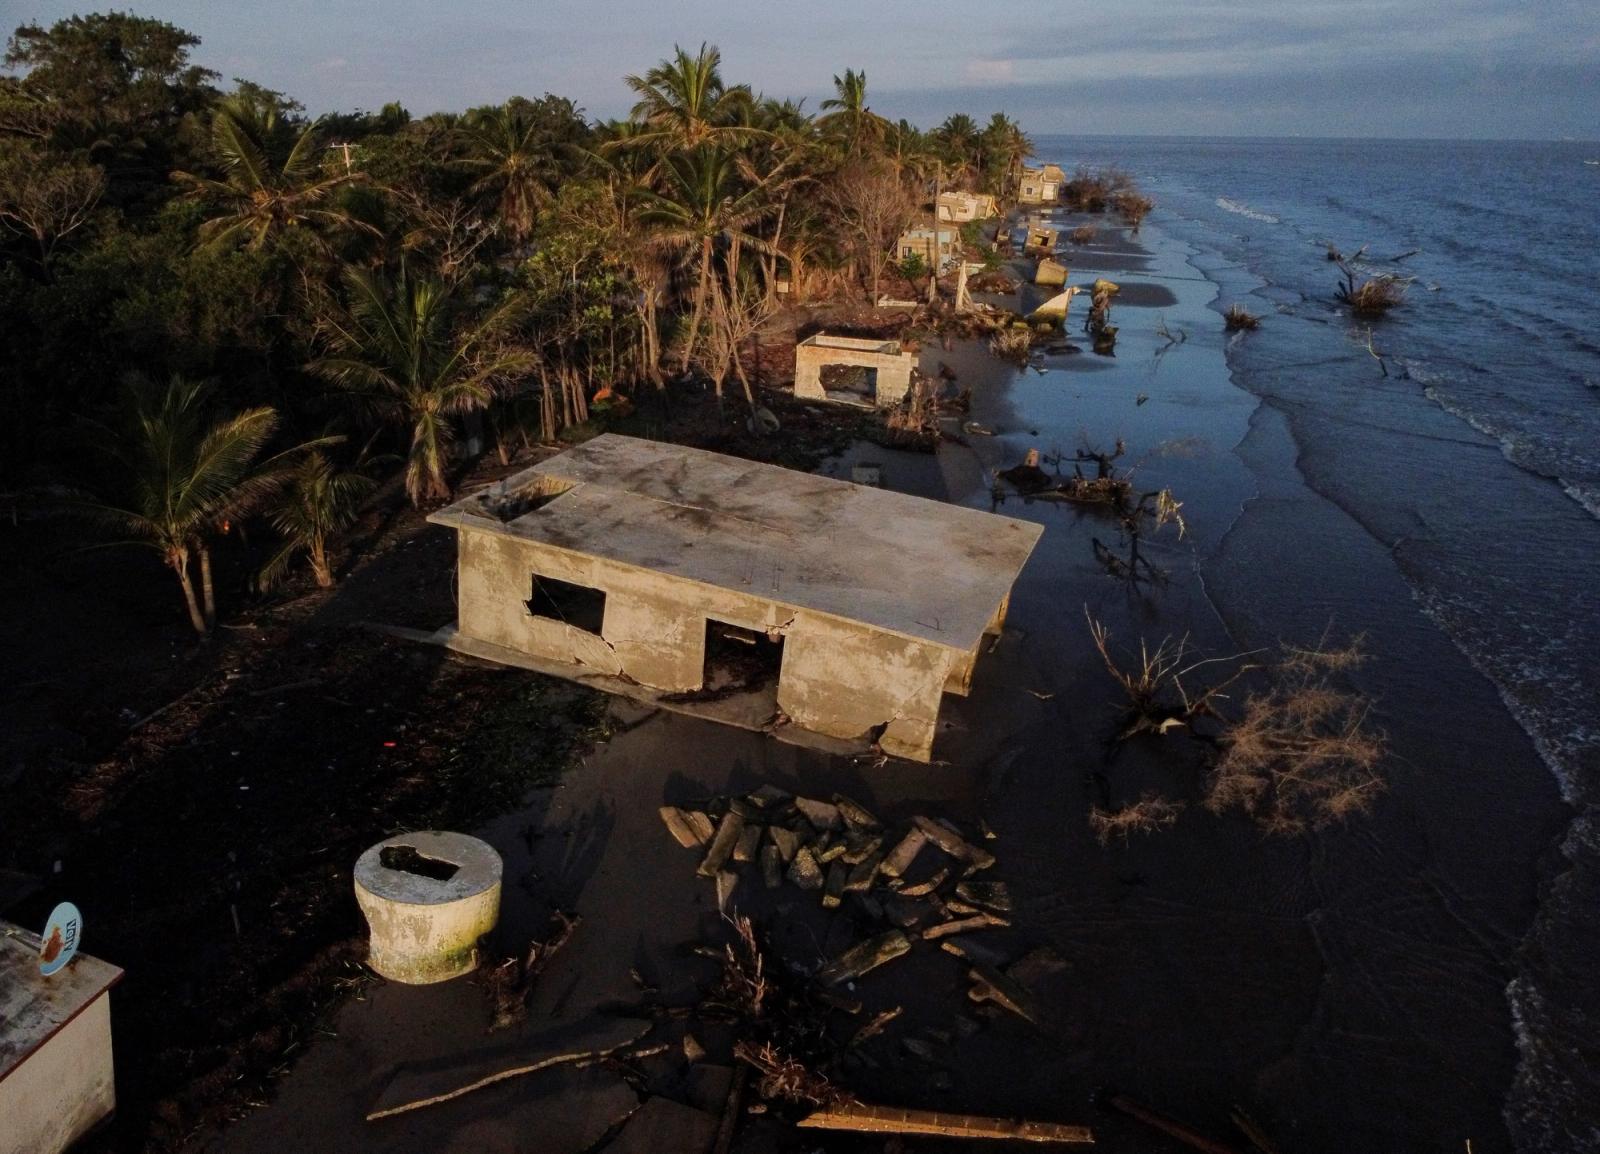 The remains of houses are pictured as rising sea levels are destroying homes built on the shoreline, forcing villagers to relocate, in El Bosque, Mexico 